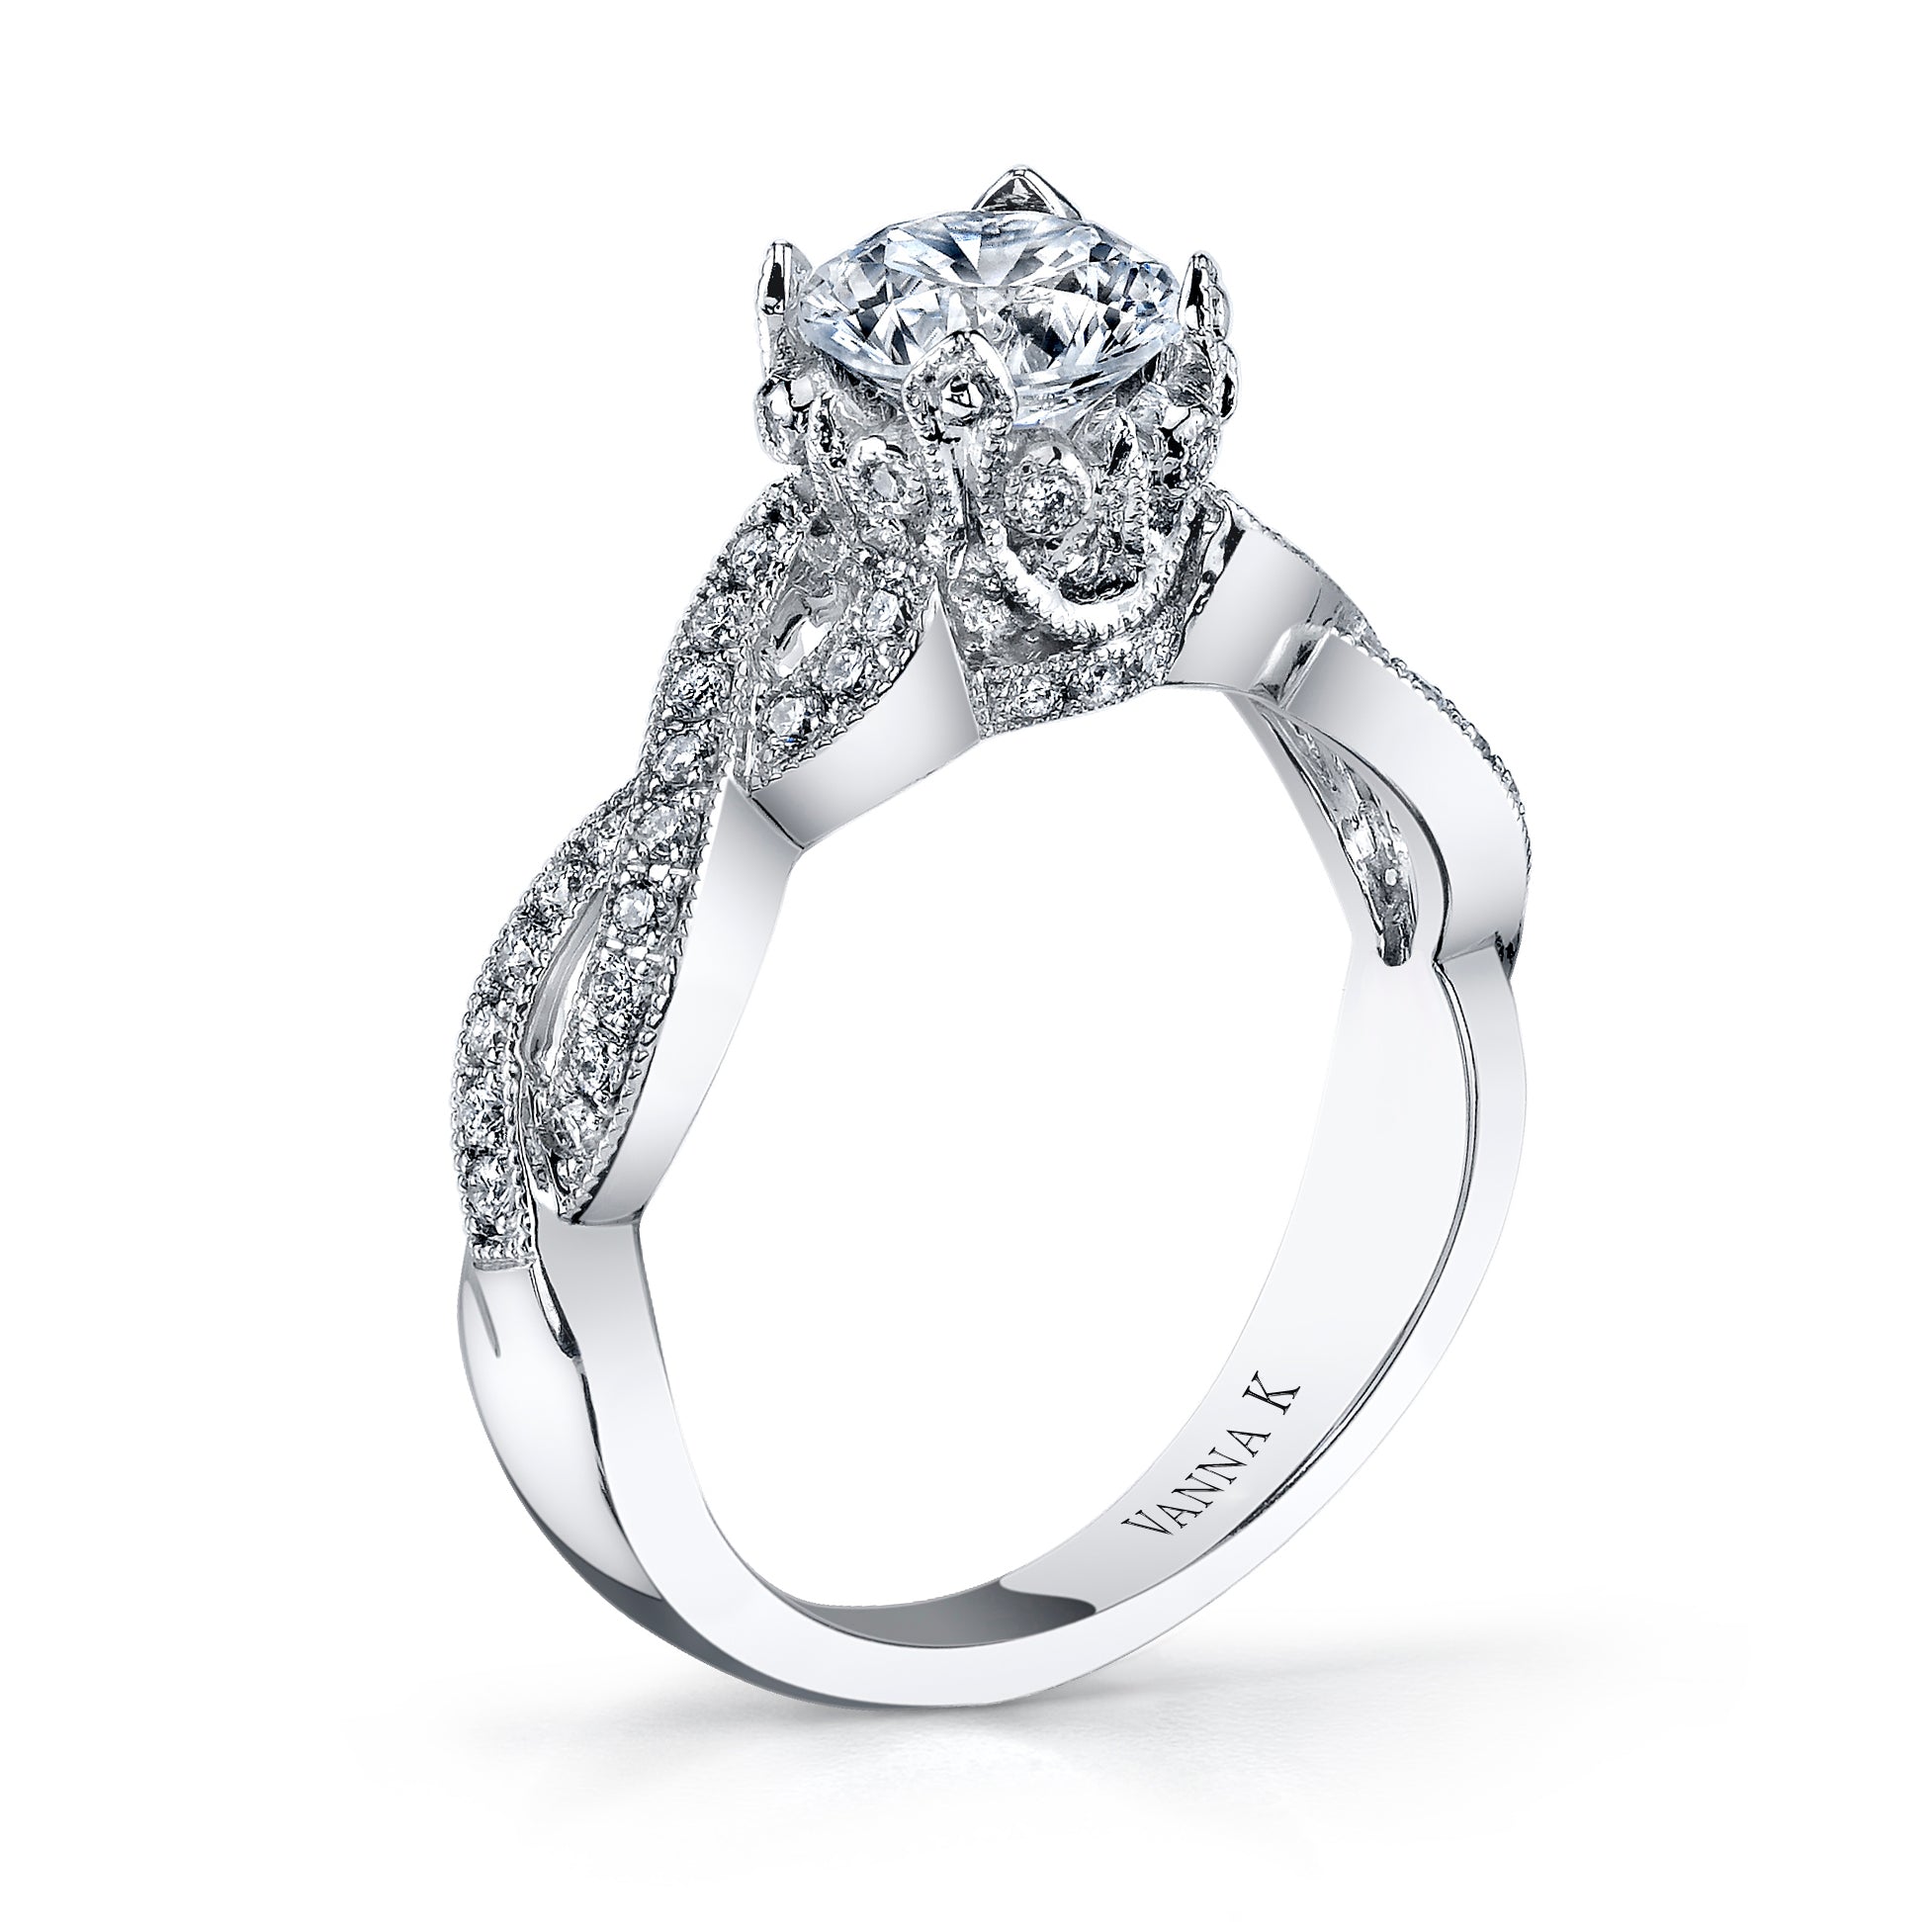 The Desirable Engagement Band Ring | Radiant Bay